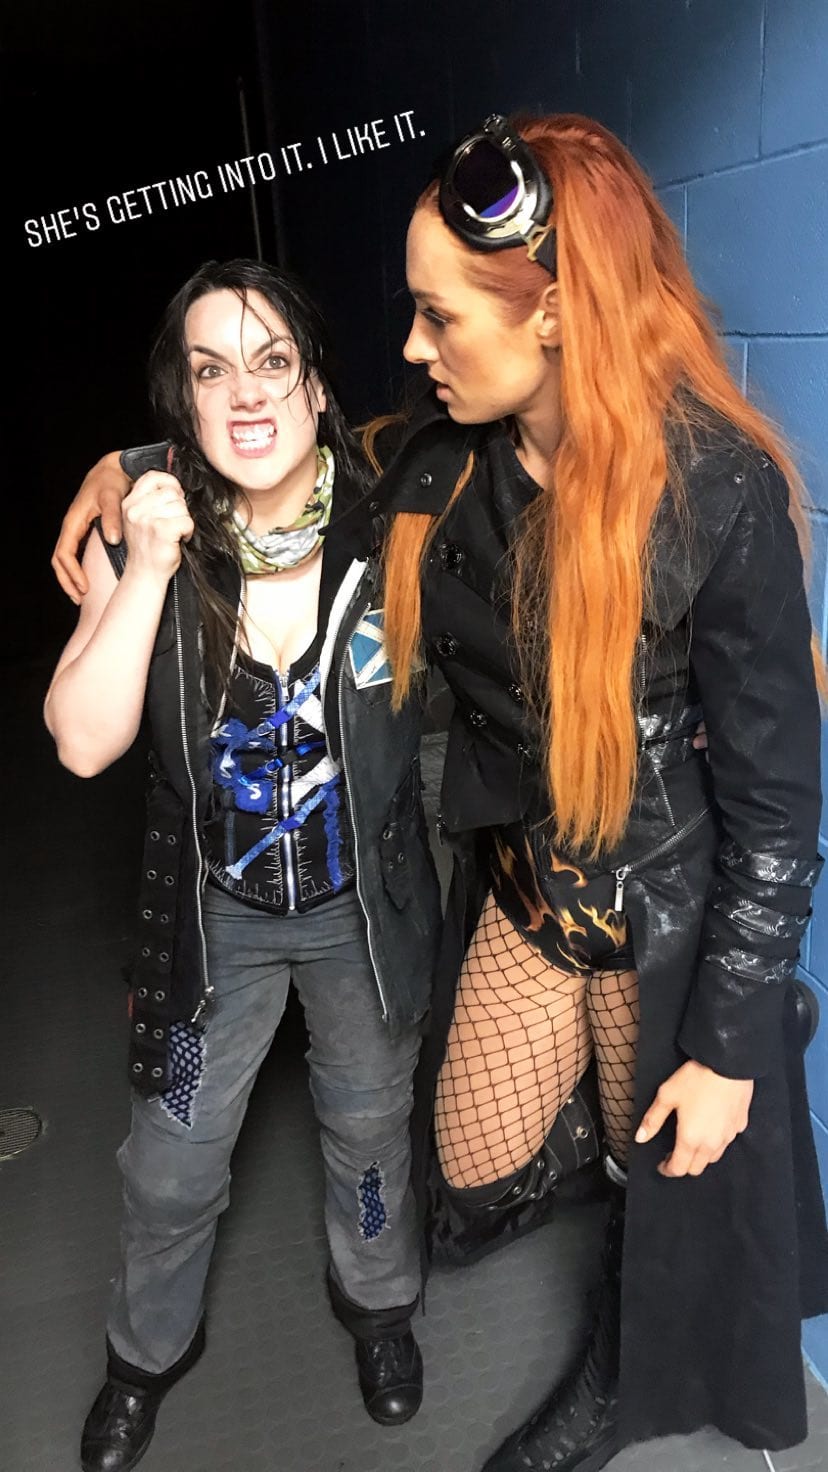 Nikki Cross Teams Up With Becky Lynch At SmackDown Live Event - 2